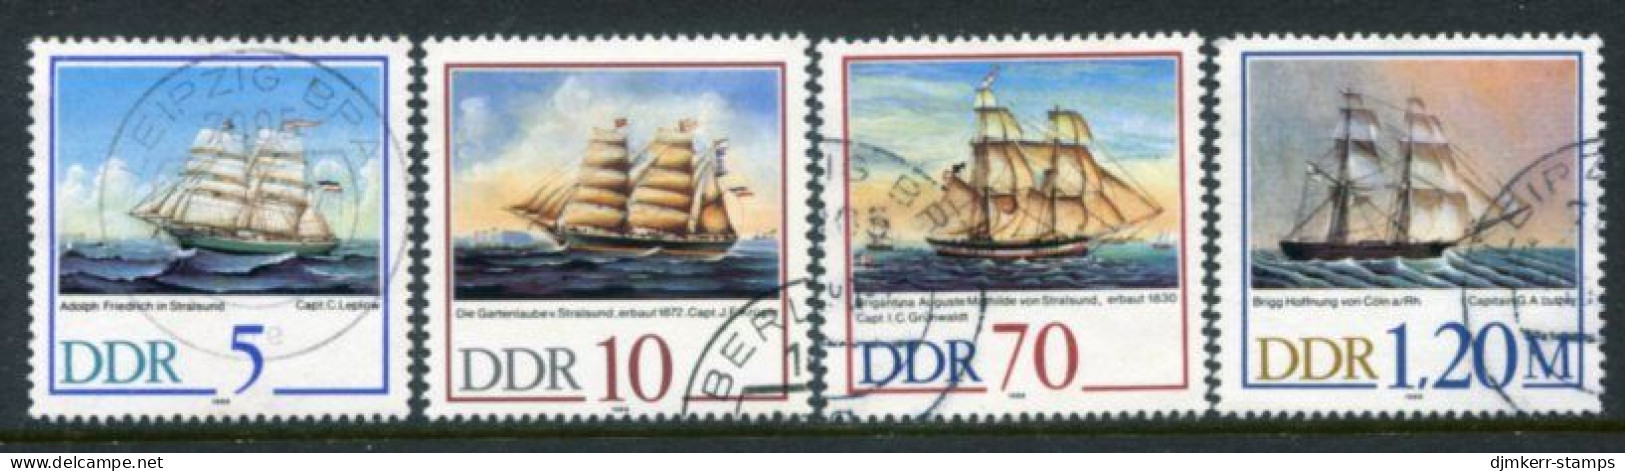 EAST GERMANY / DDR 1988 Sailing Ships Used .  Michel 3198-201 - Gebraucht